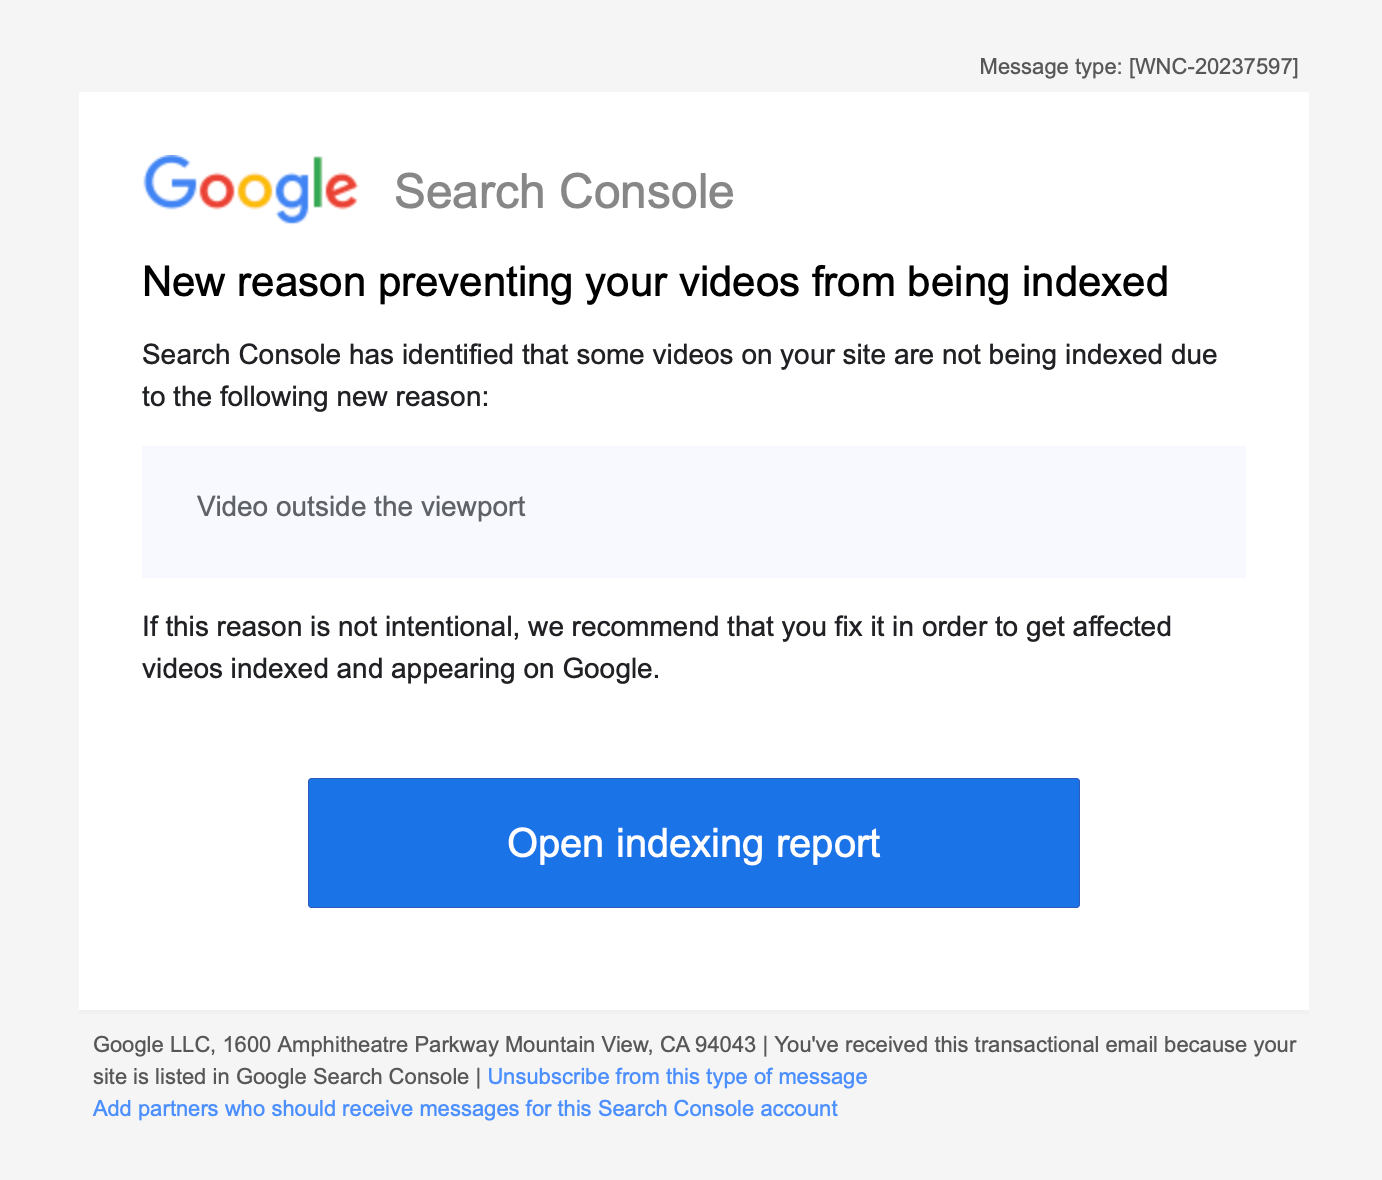 Video Outside the Viewport - Google Search Console Message